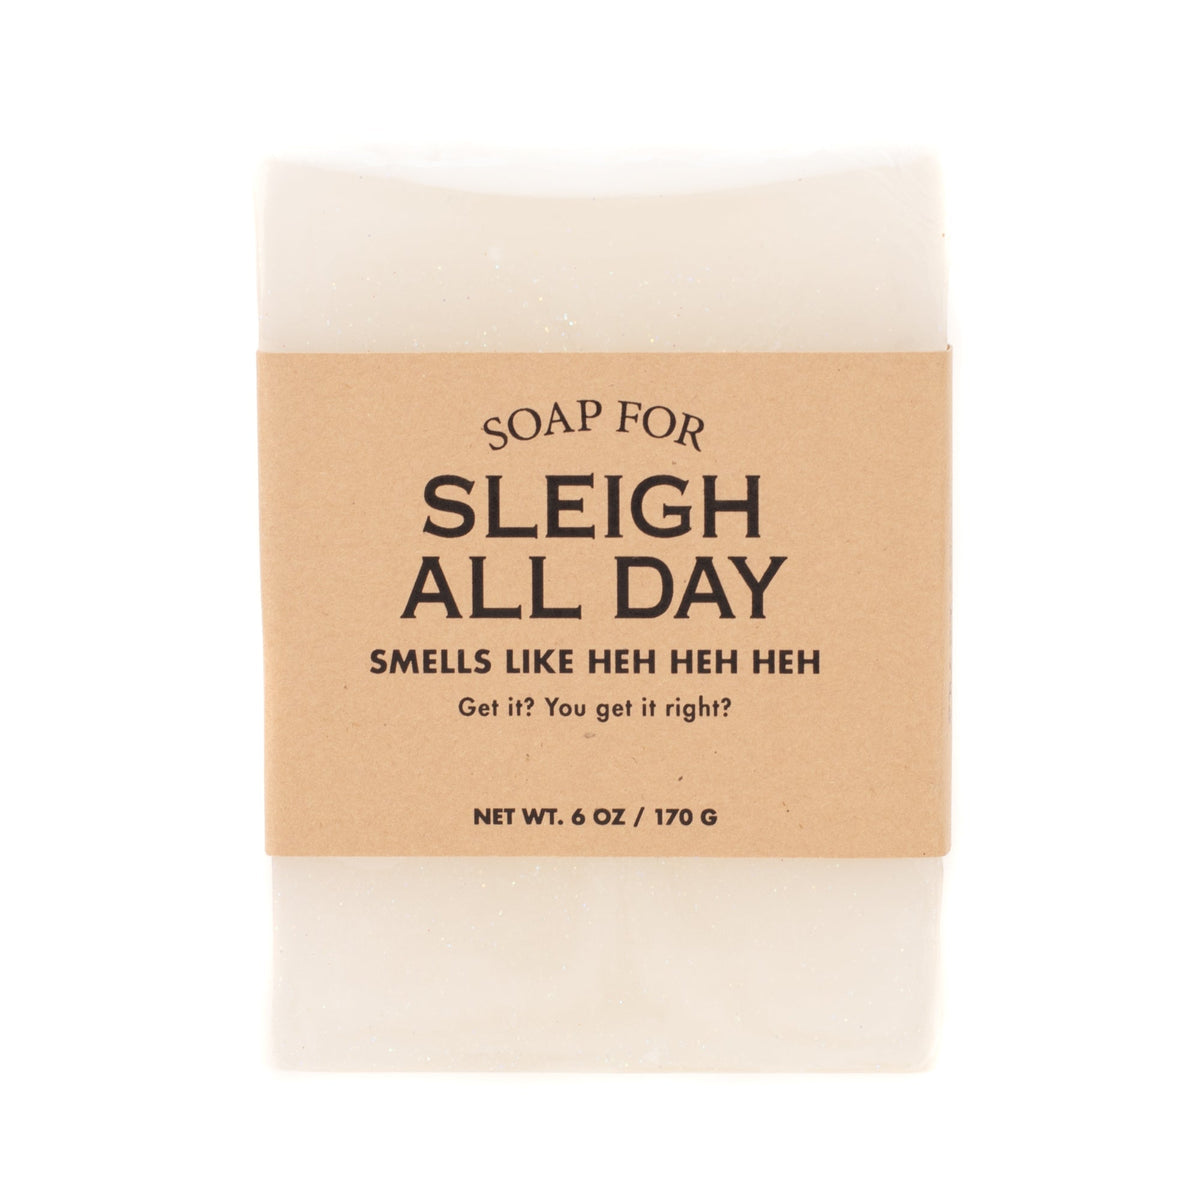 A Soap For Sleigh All Day